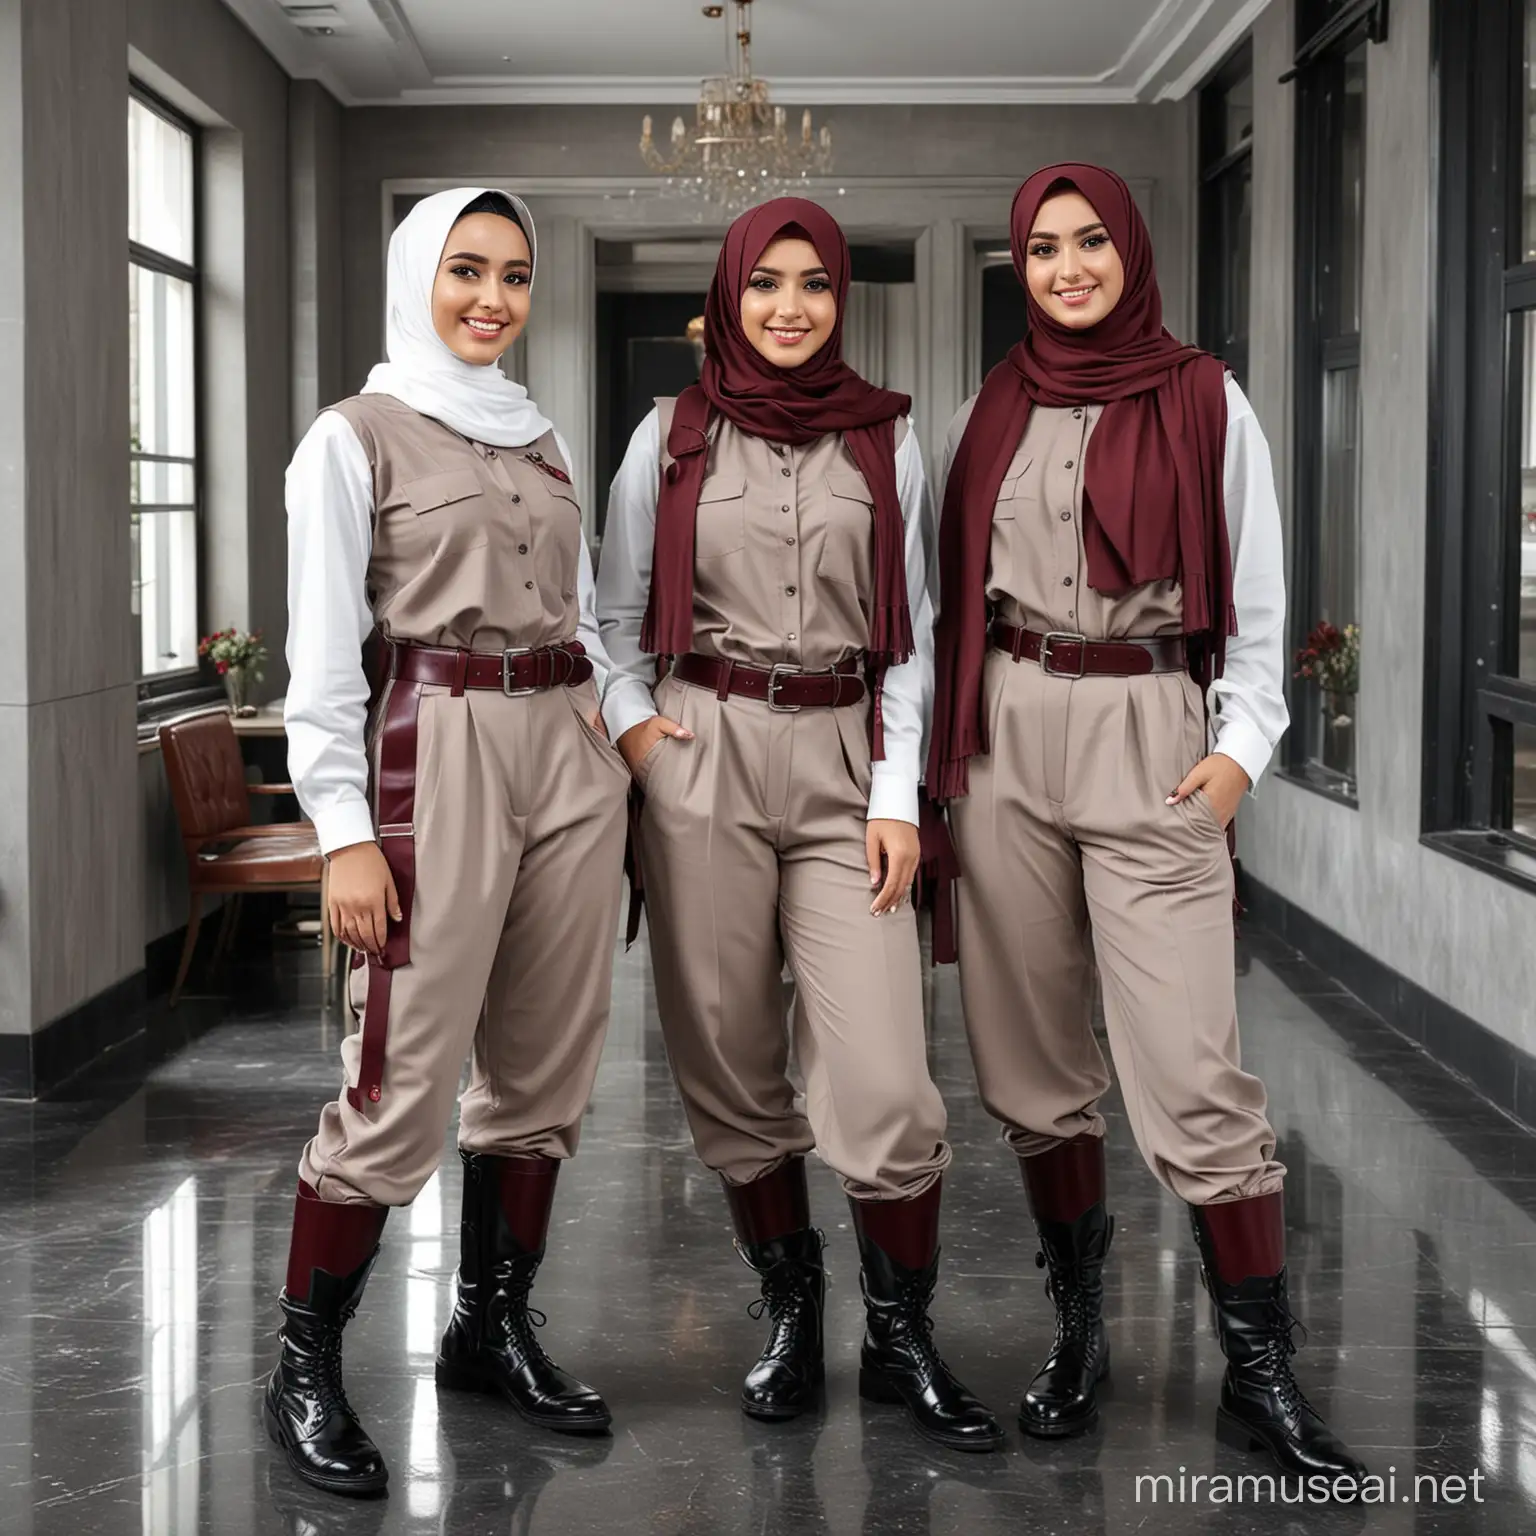 Pretty HijabWearing Models Smiling in PDH Uniforms